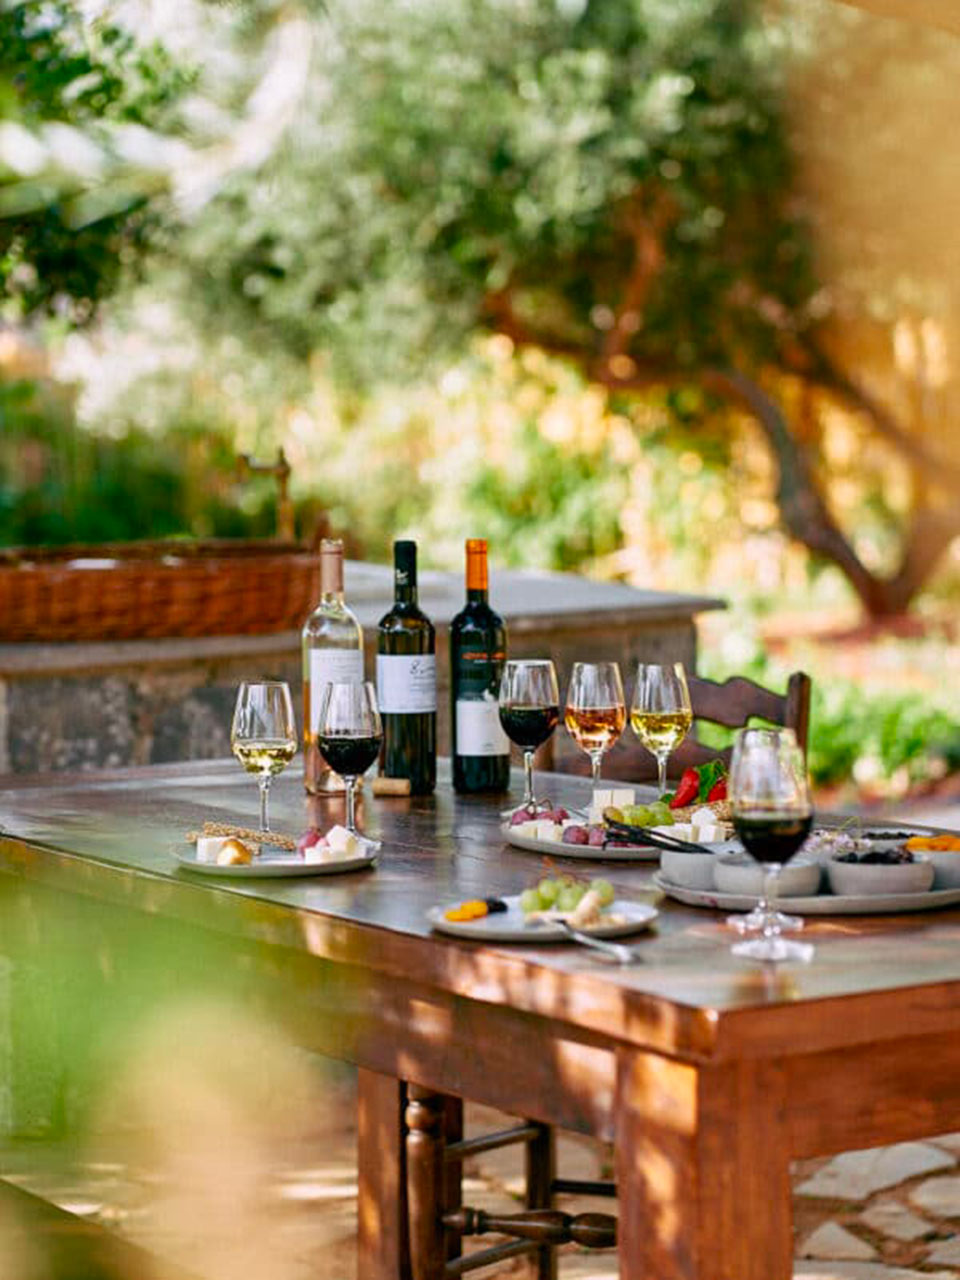 outdoor table with bottles of wine, glasses and typical products for tasting